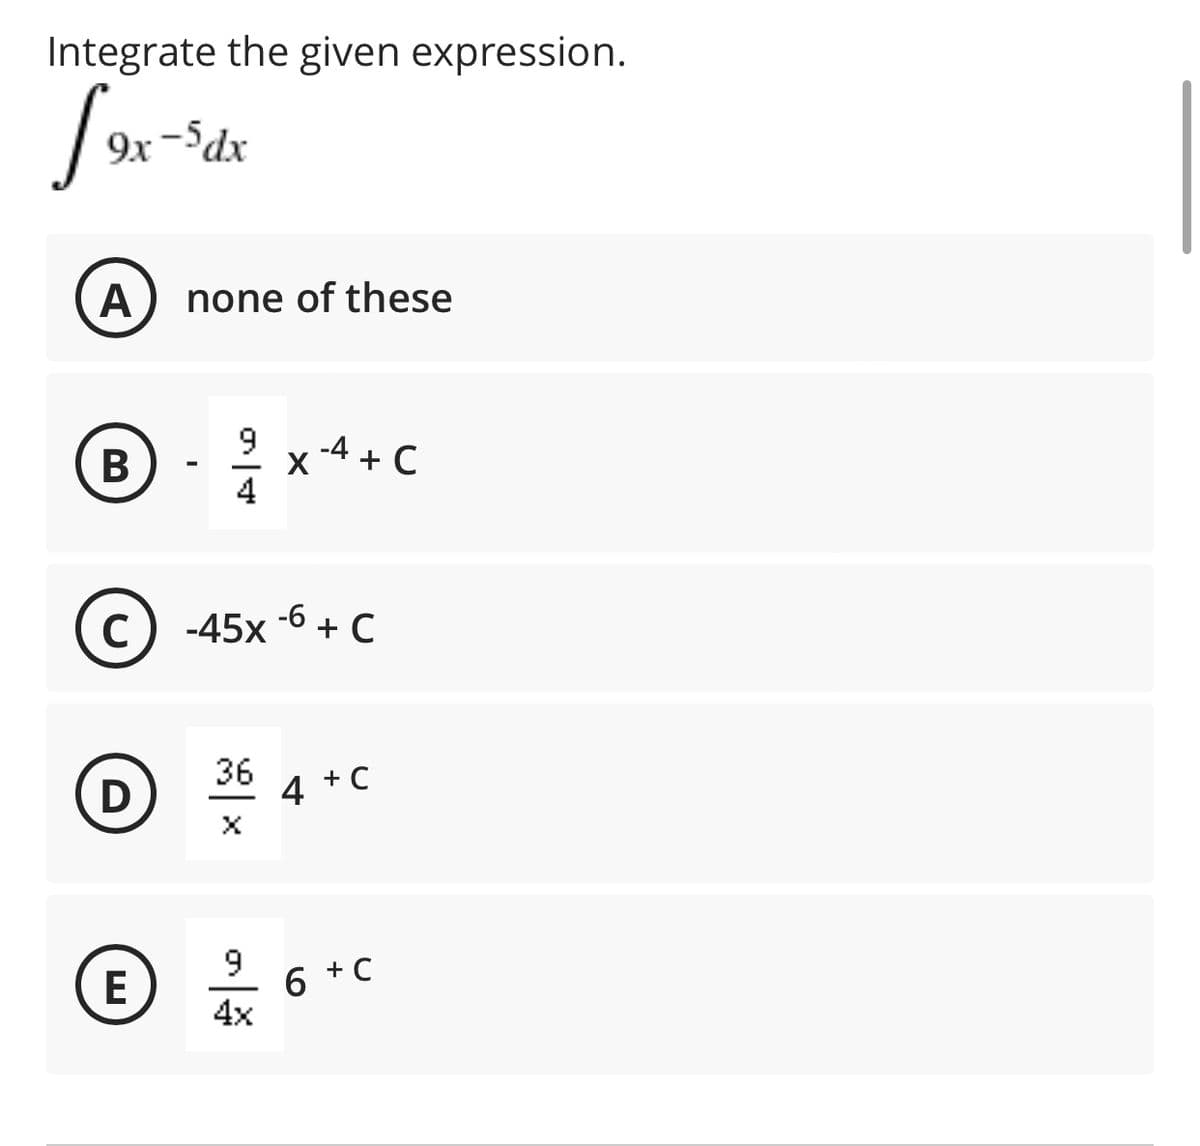 Integrate the given expression.
9x -dx
none of these
9
x -4 +C
4
В
(c) -45x -6 + c
C
36
4 +C
9
+ C
E
4x
